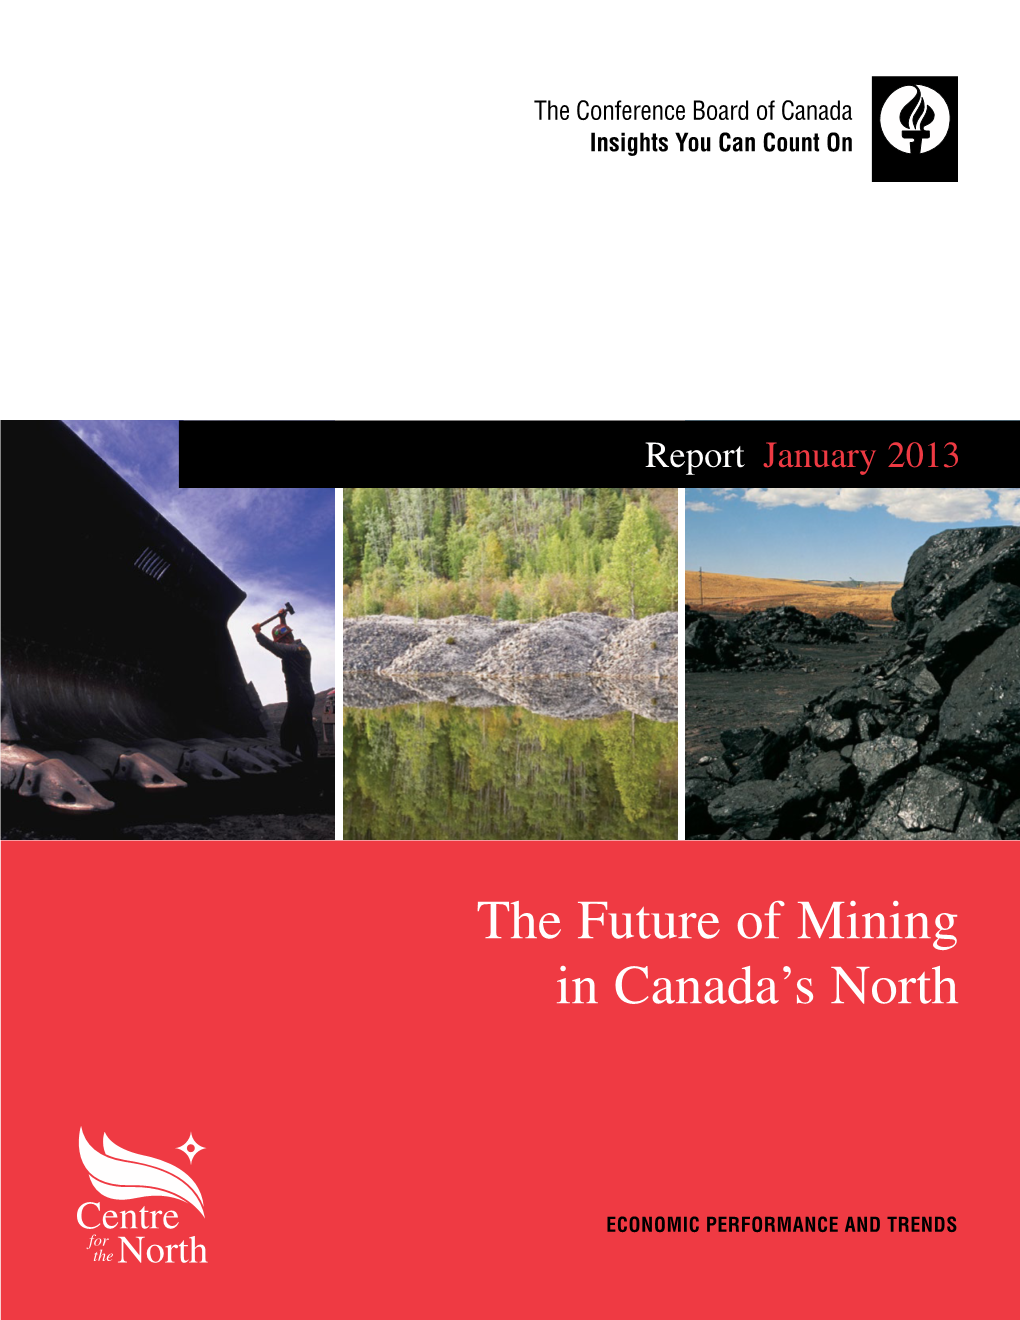 The Future of Mining in Canada's North